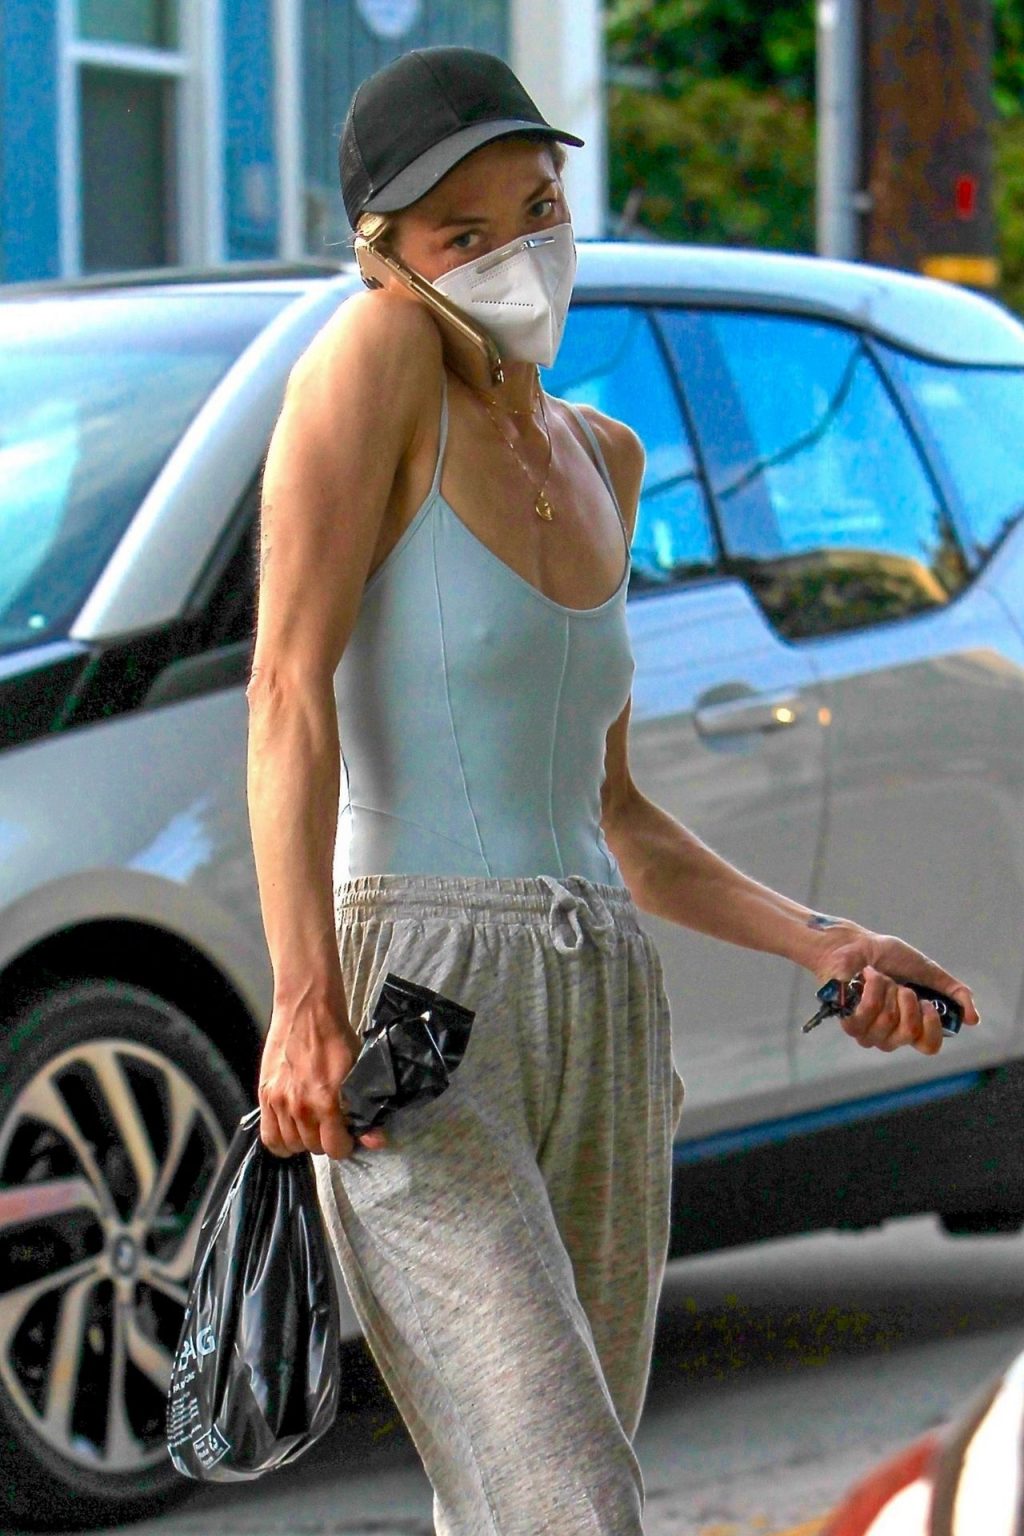 Jaime King Leaves a Liquor Store in Hollywood Wearing a Protective Mask (9 Photos)